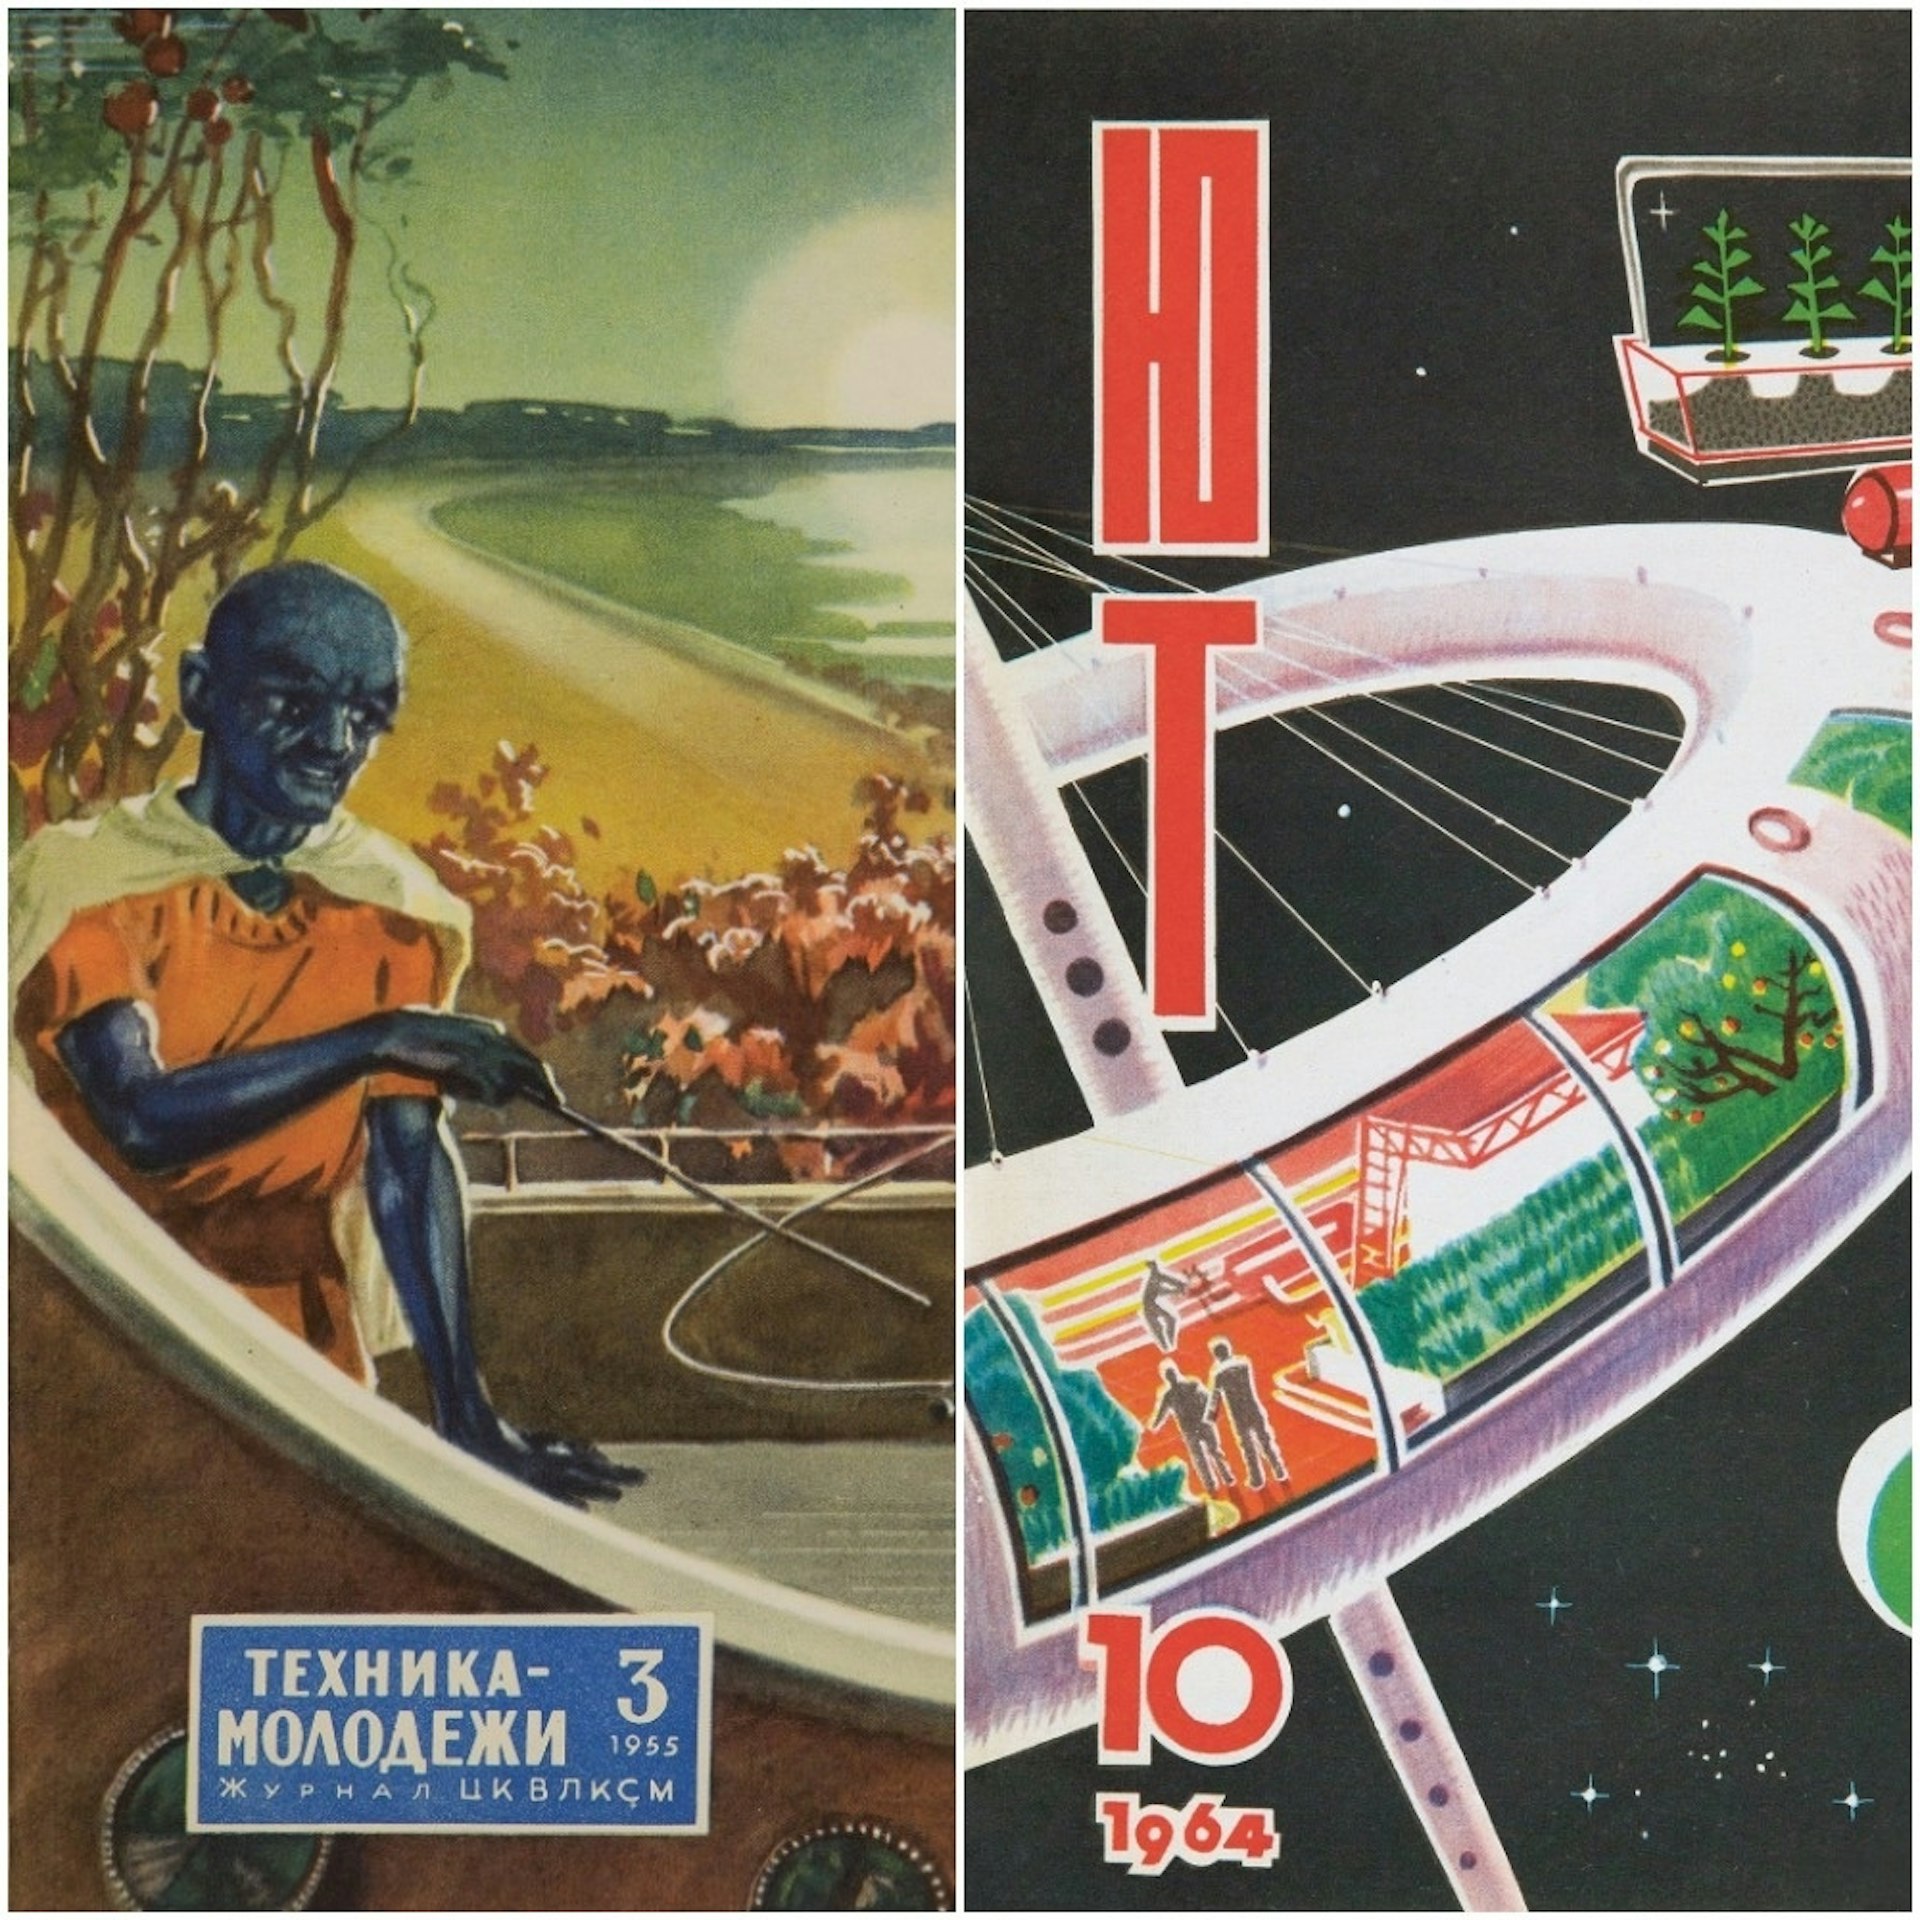 A cosmic collection of old Soviet space imagery